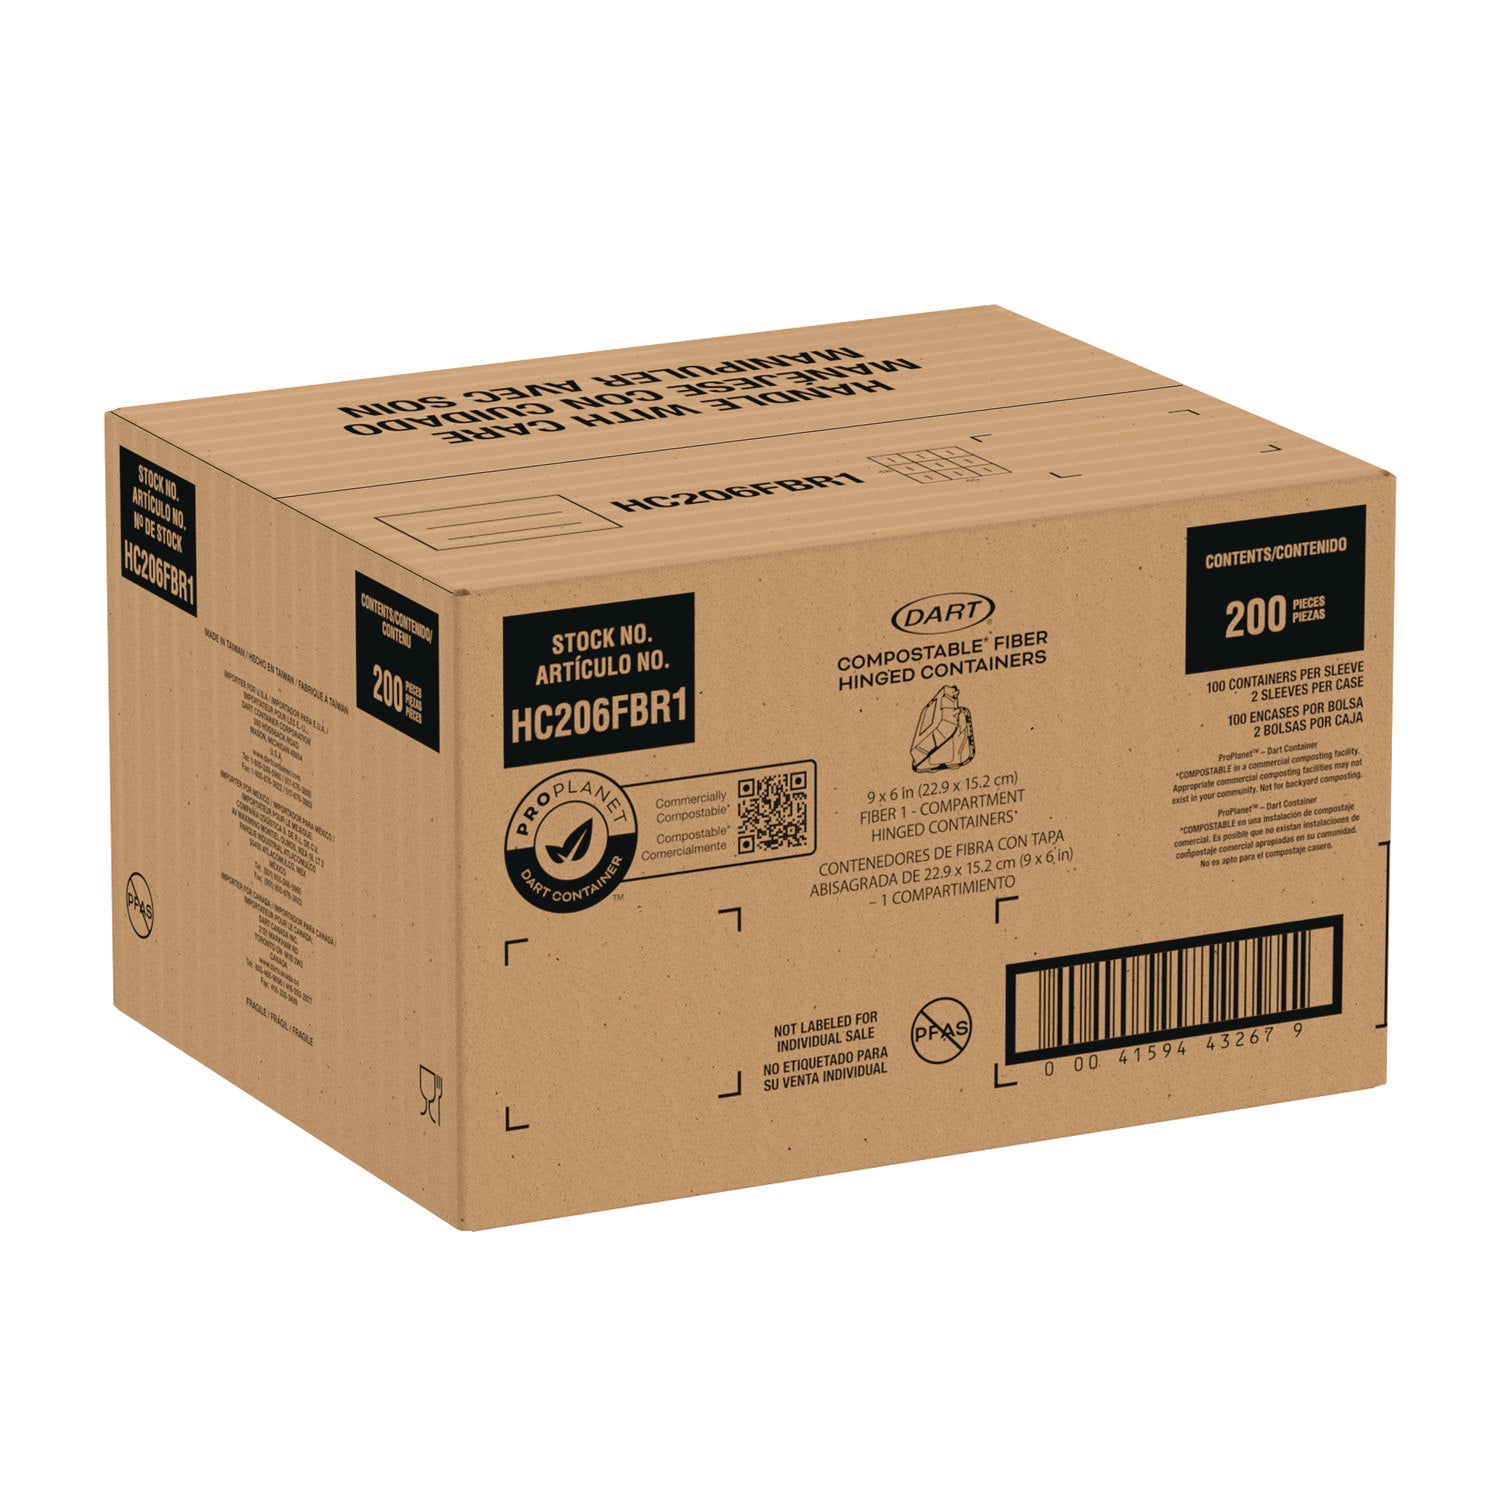 compostable-fiber-hinged-containers-proplanet-seal-634-x-906-x-197-ivory-molded-fiber-200-carton_dcchc206fbr1 - 3